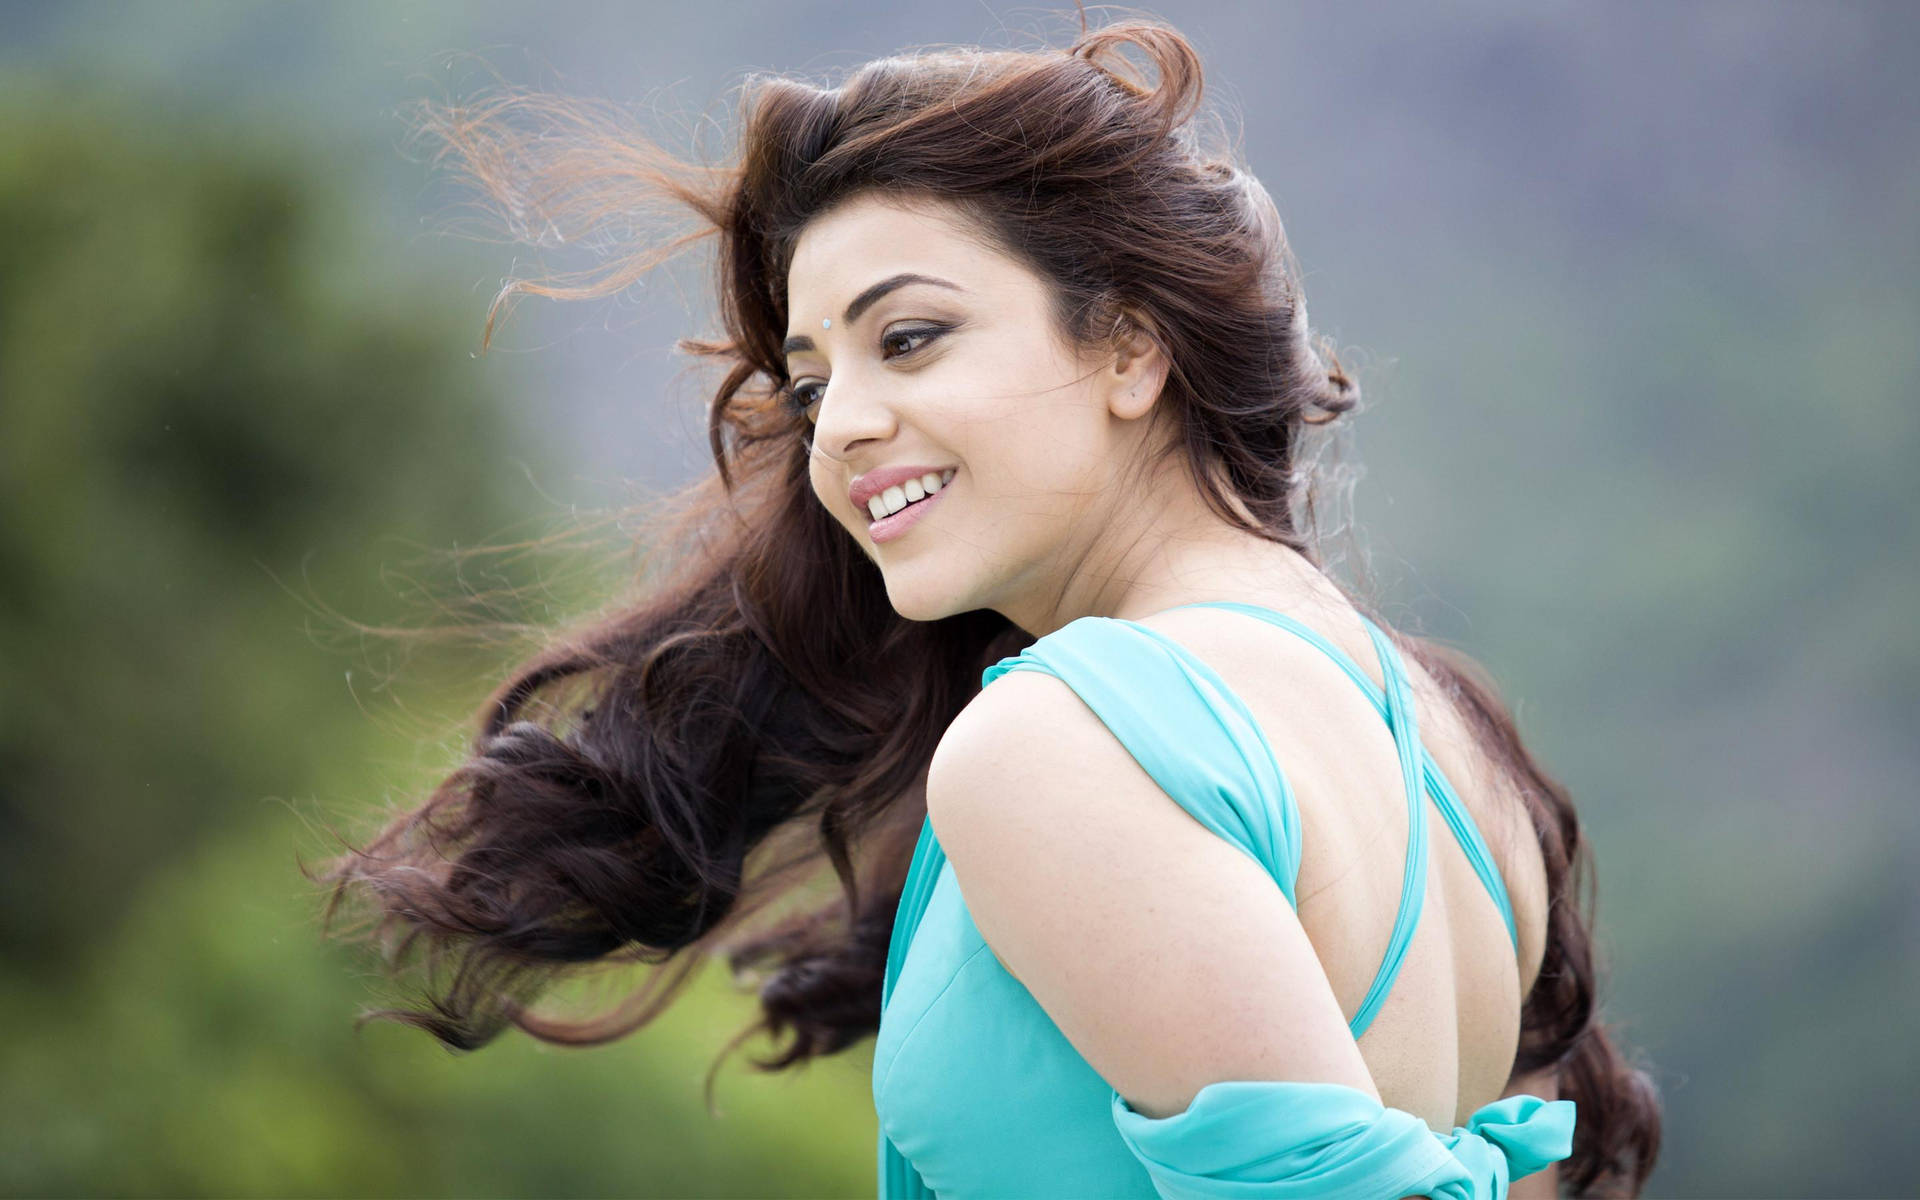 Stunning Hd Image Of Actress Kajal Agarwal With Flowing Hair Background